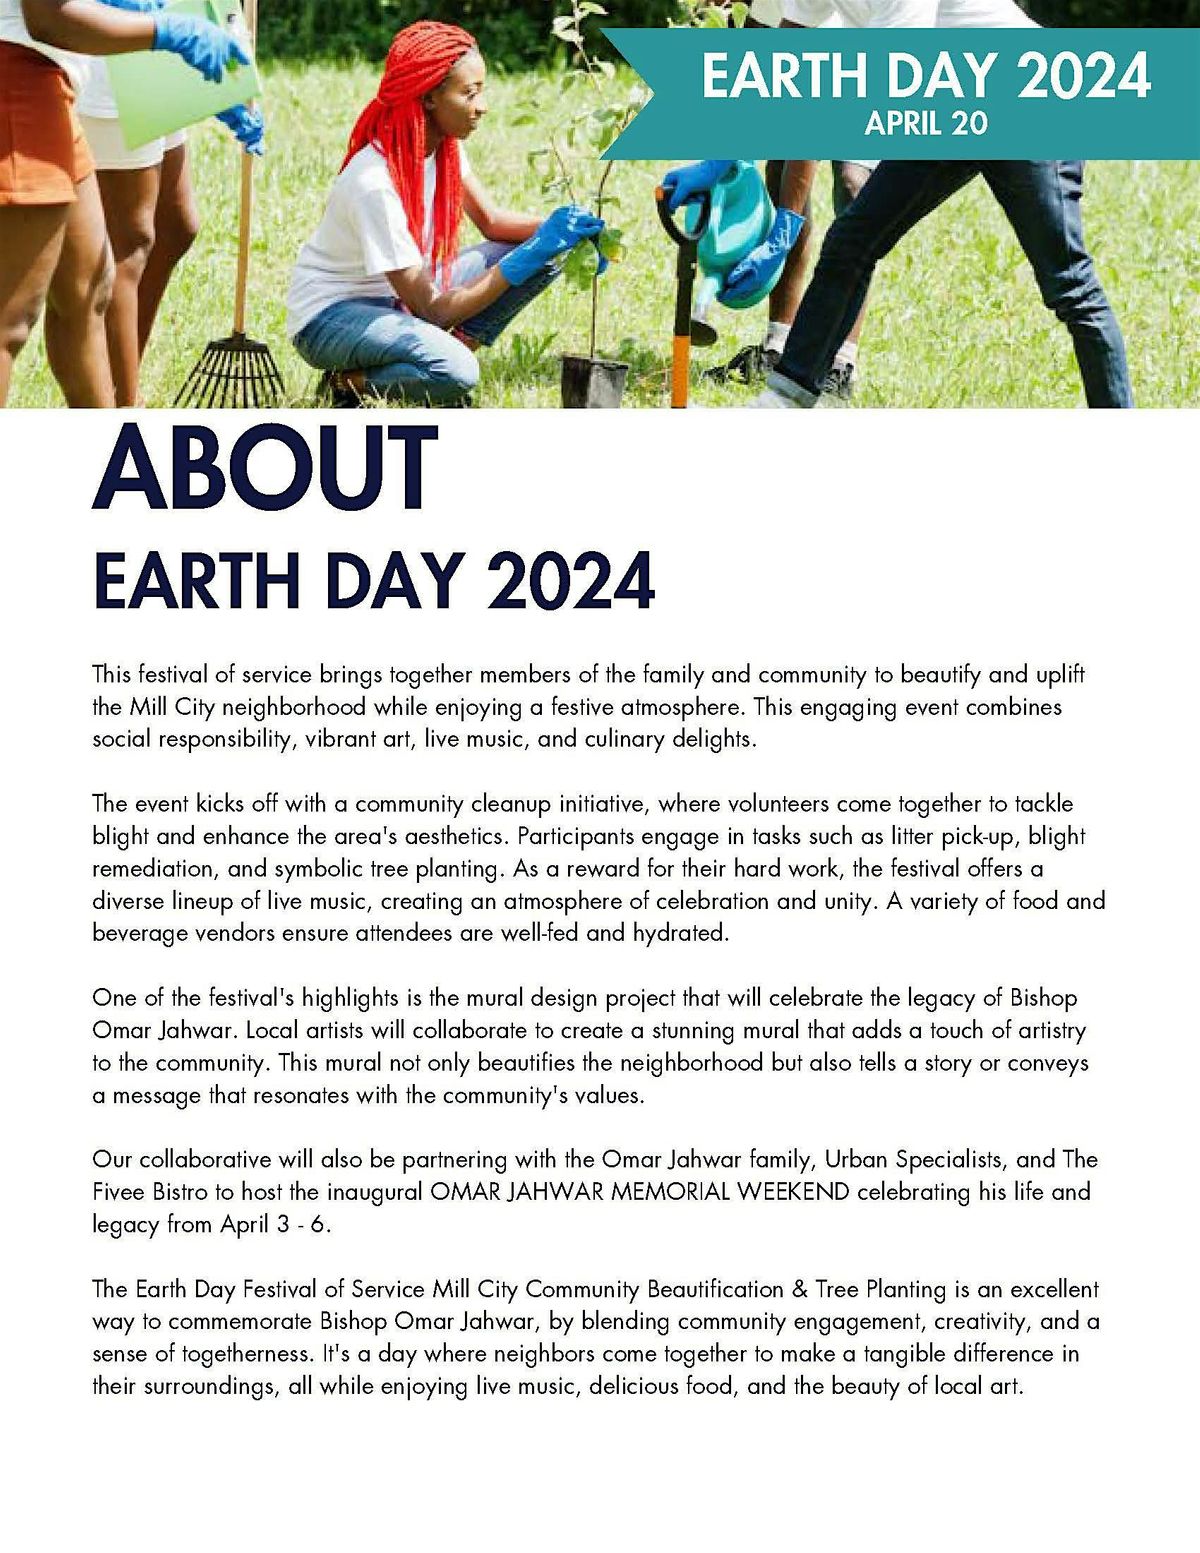 KEEP UP THE DREAM - EARTH DAY 2024